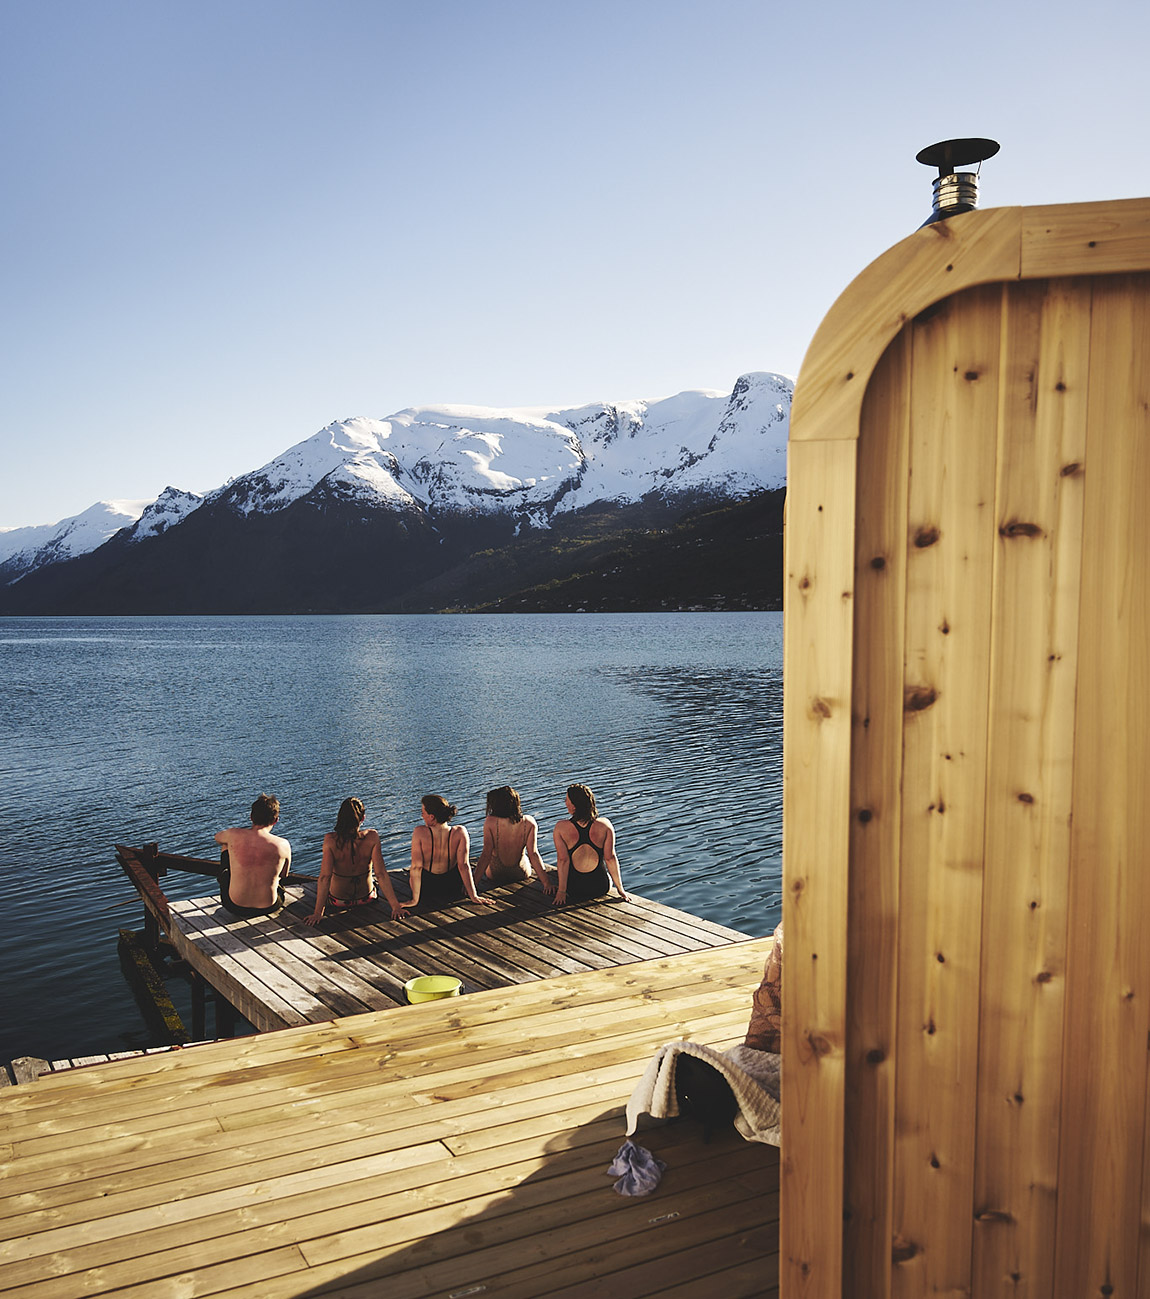 Heit Sauna: A sauna with a view of Norway’s idyllic fjords